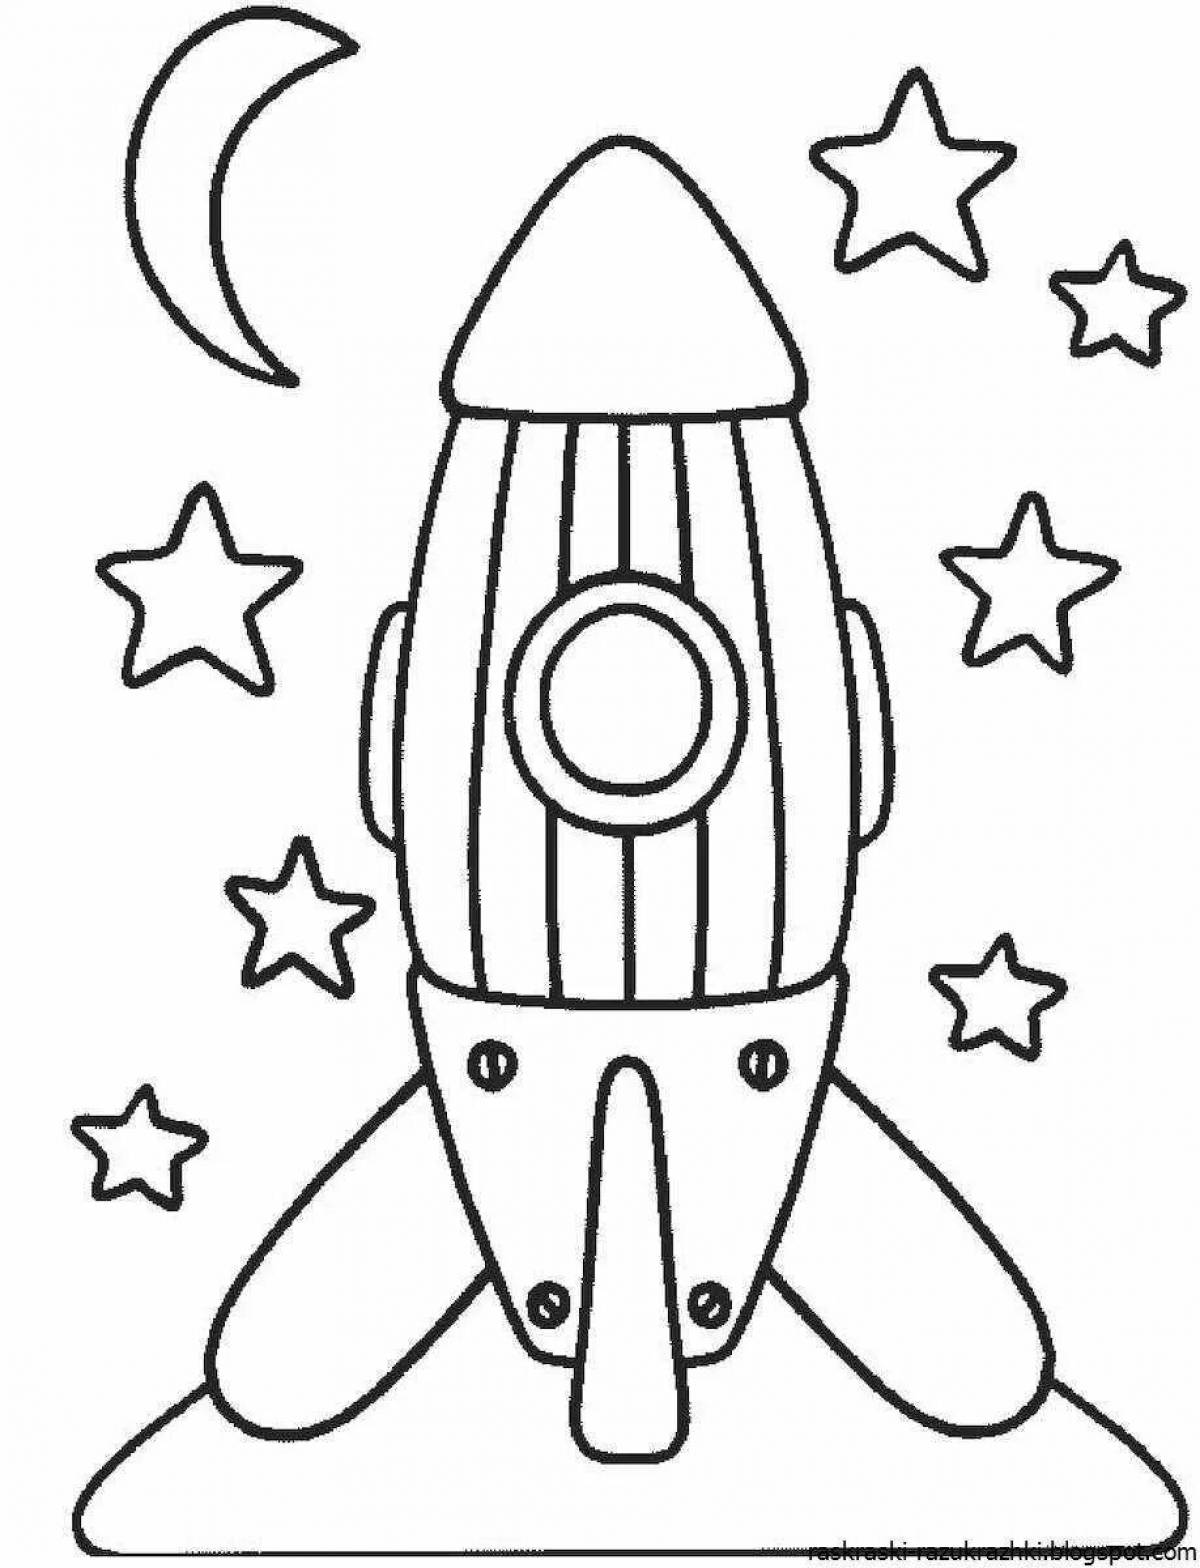 Glamorous space rocket coloring page